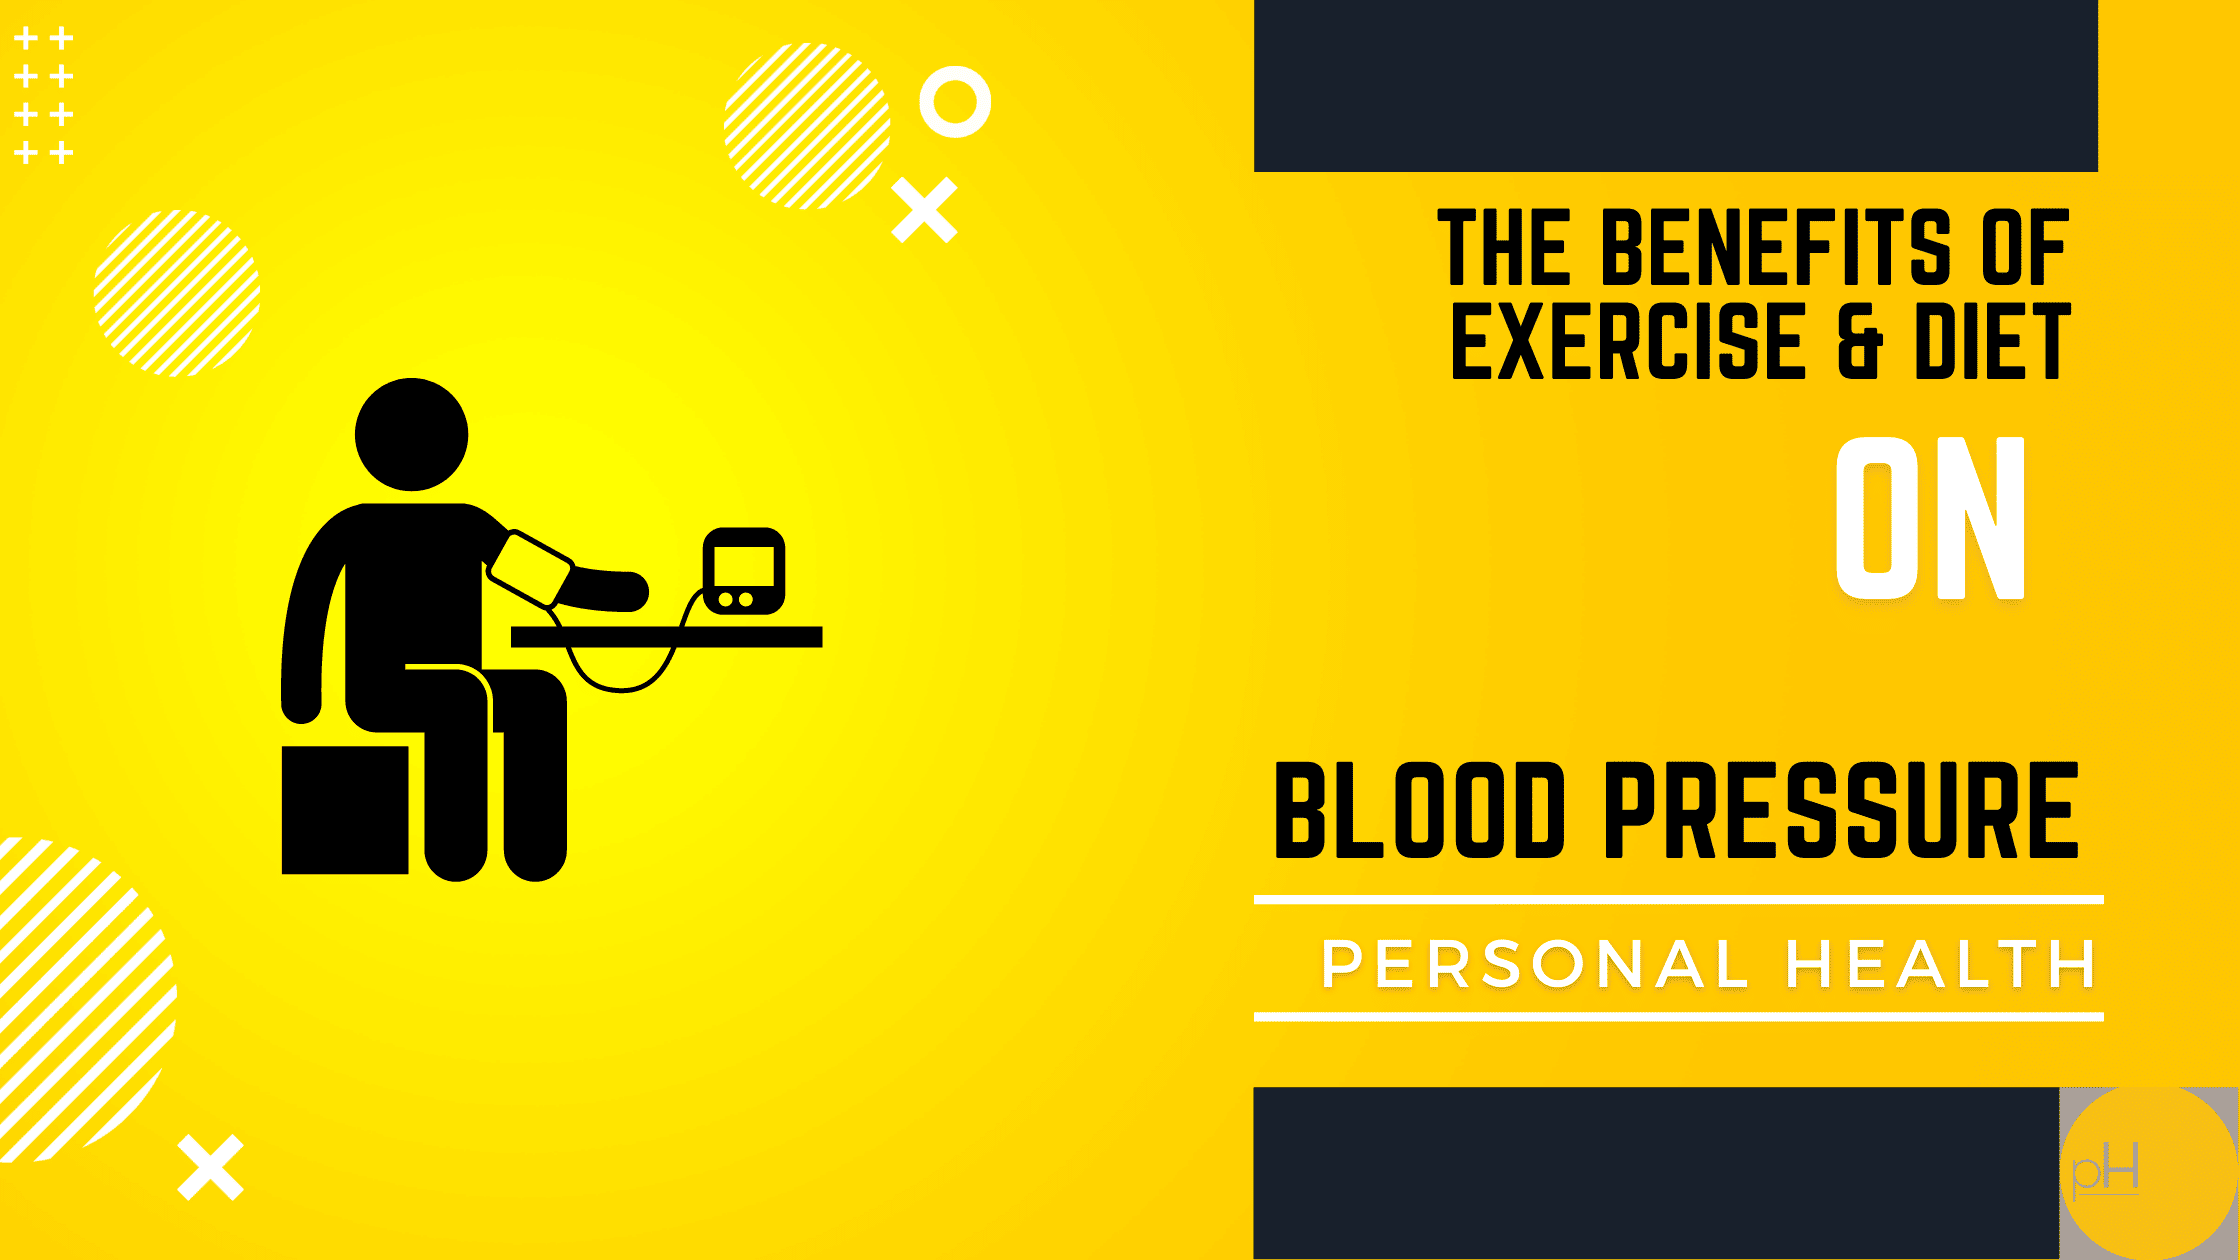 The benefits of exercise and diet on blood pressure